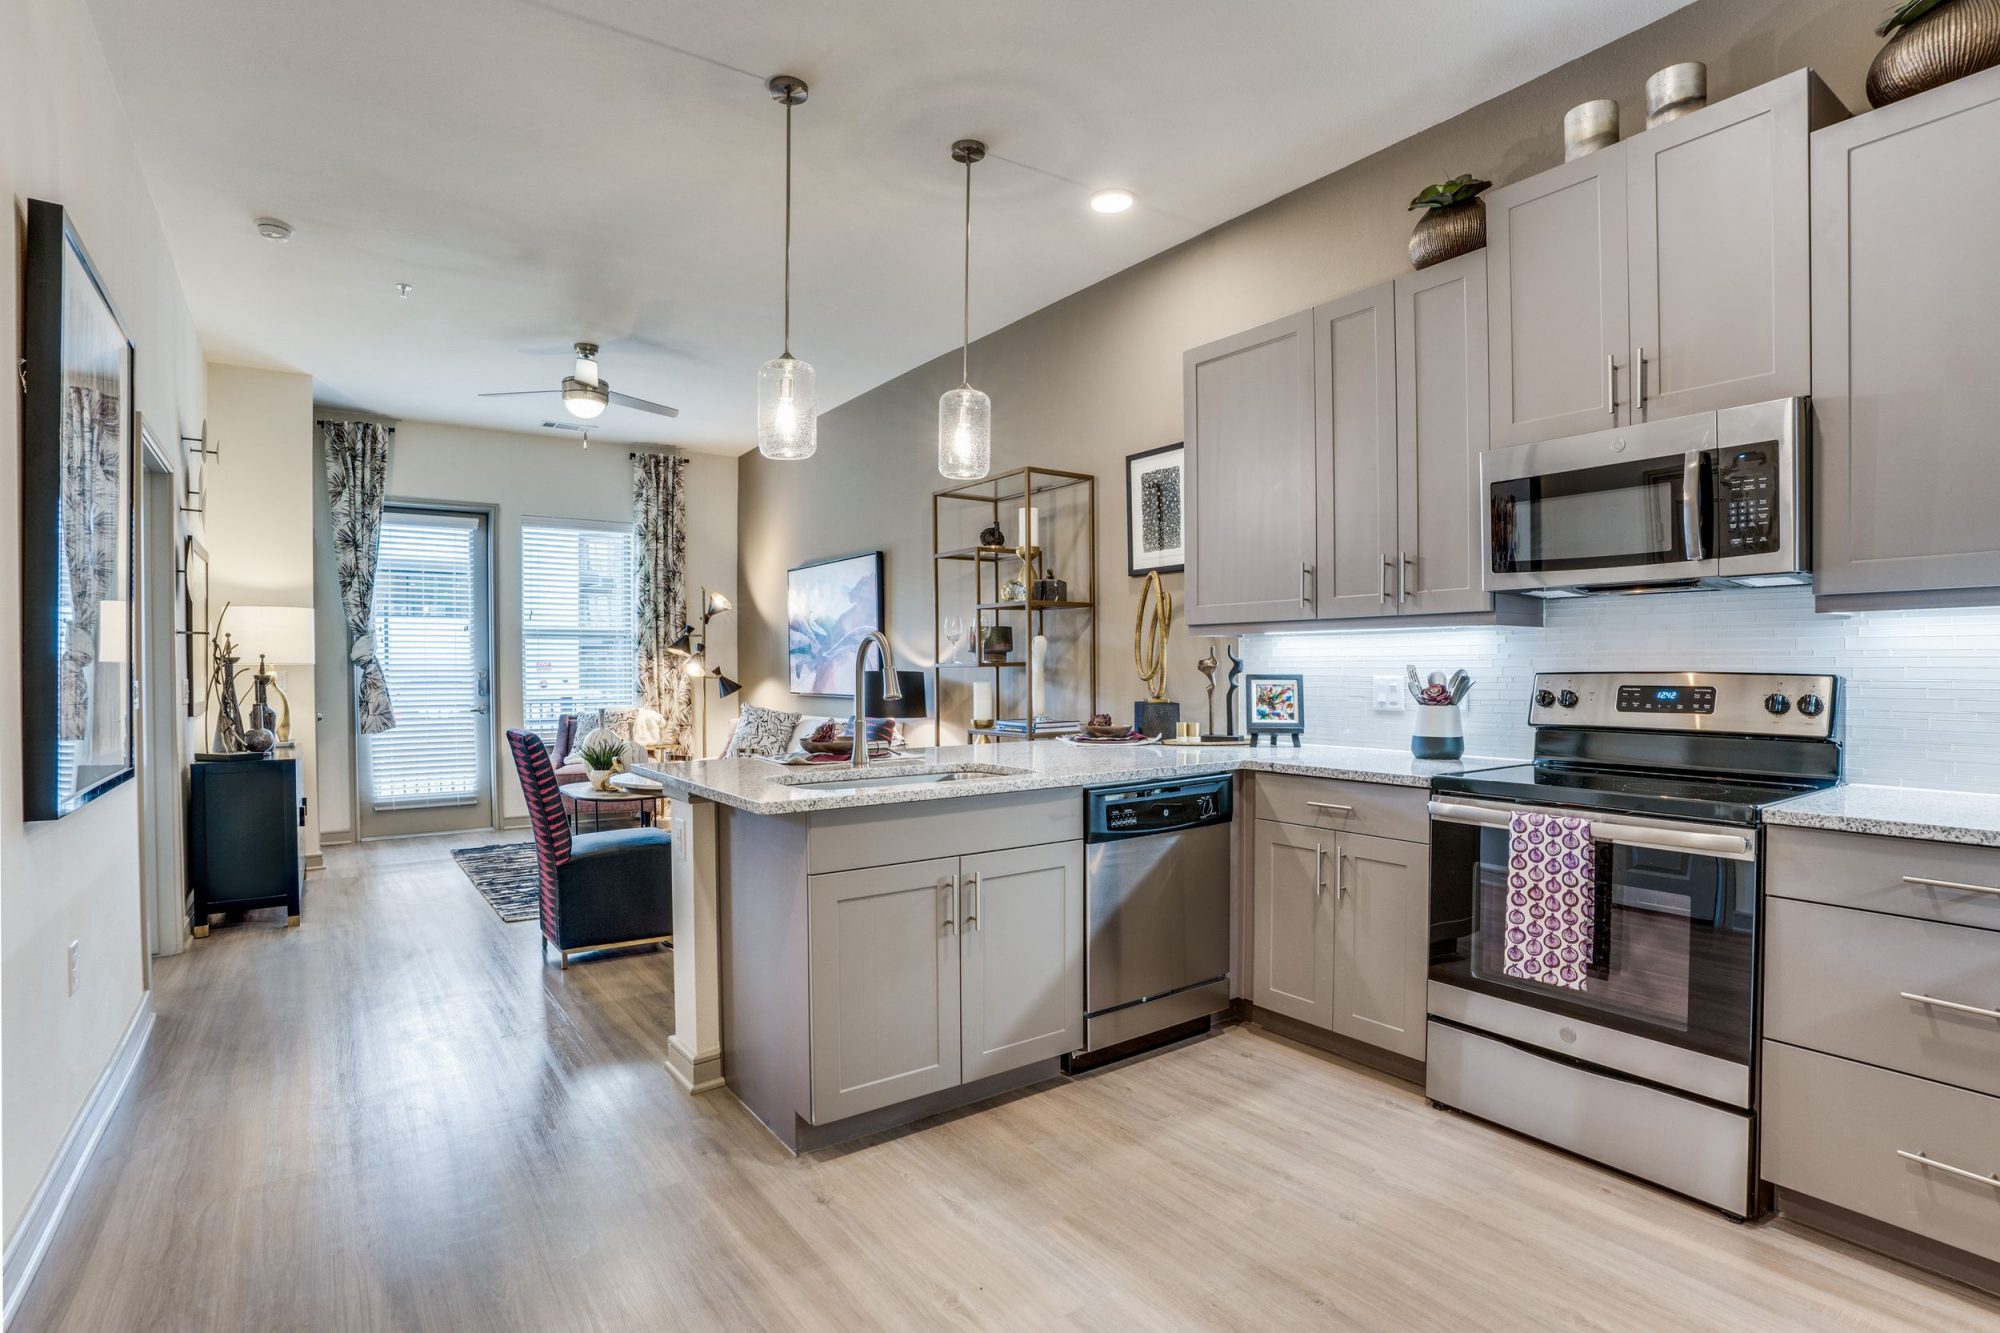 View from the L shaped kitchen with marble countertops, stainless steel appliances, wood look floors, upper and lower cabinets, pendant lighting and a view into the living/dining room